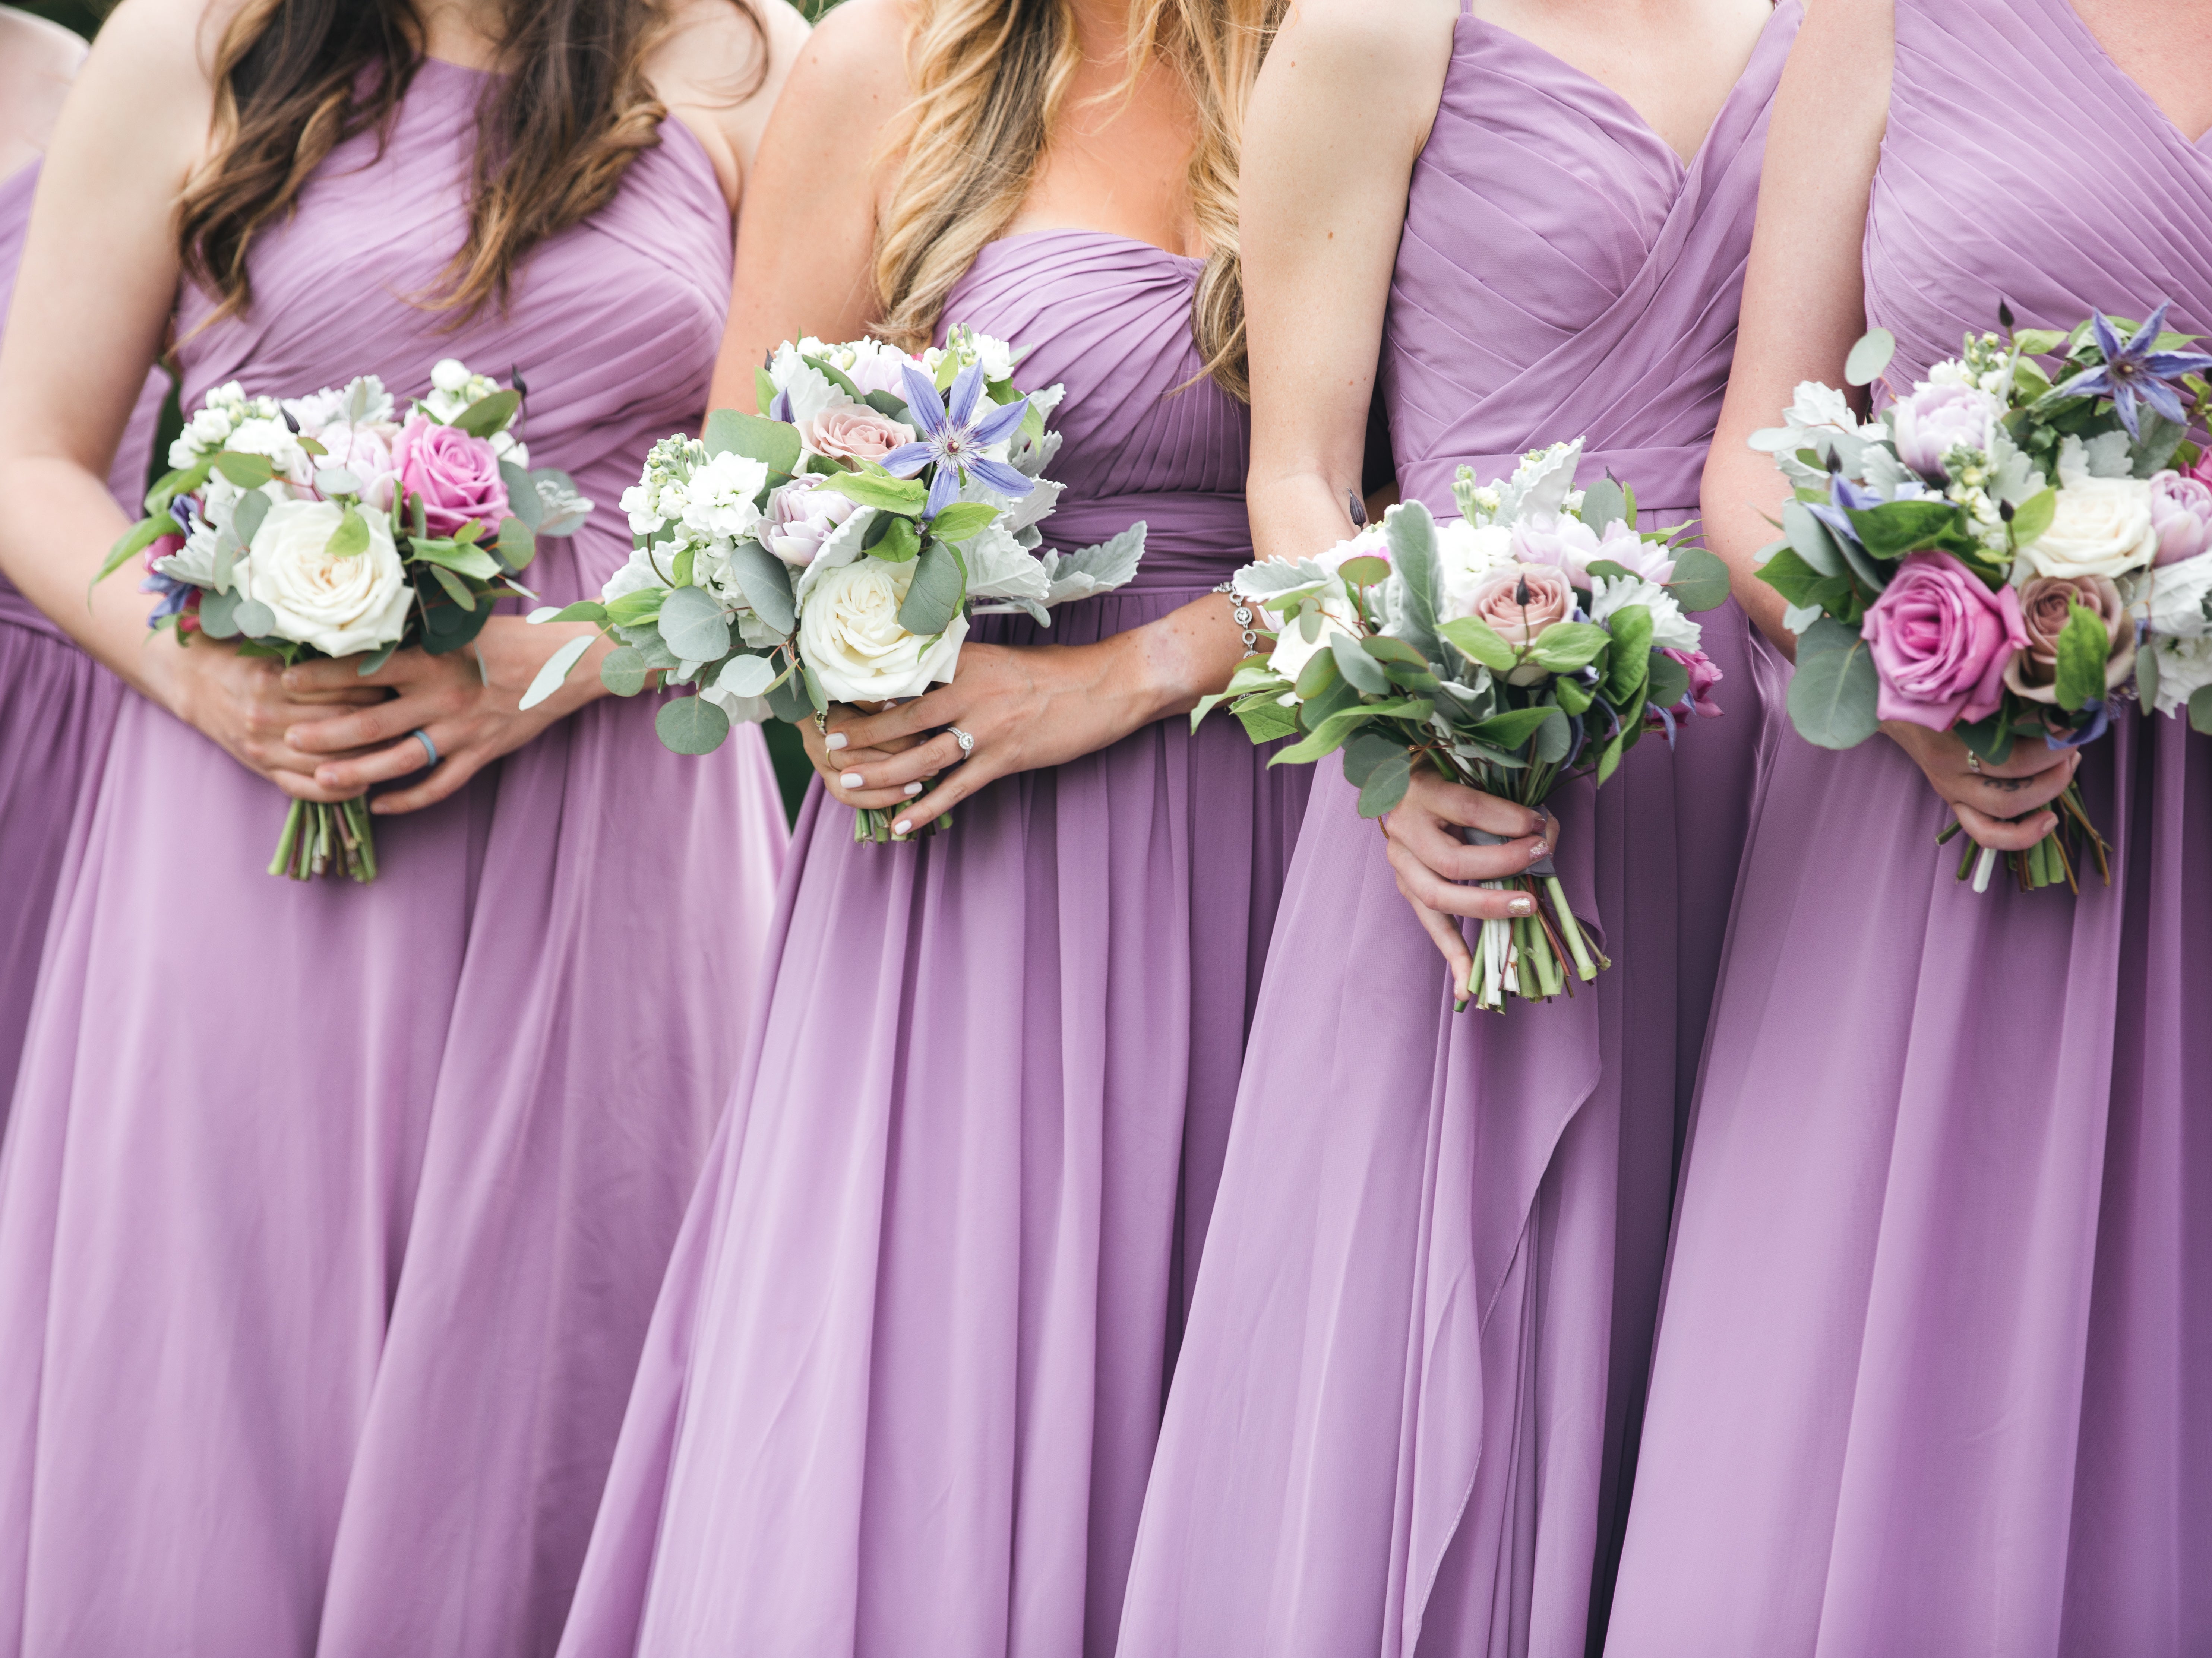 The most important things to consider when asked to be a bridesmaid, according to a professional bridesmaid